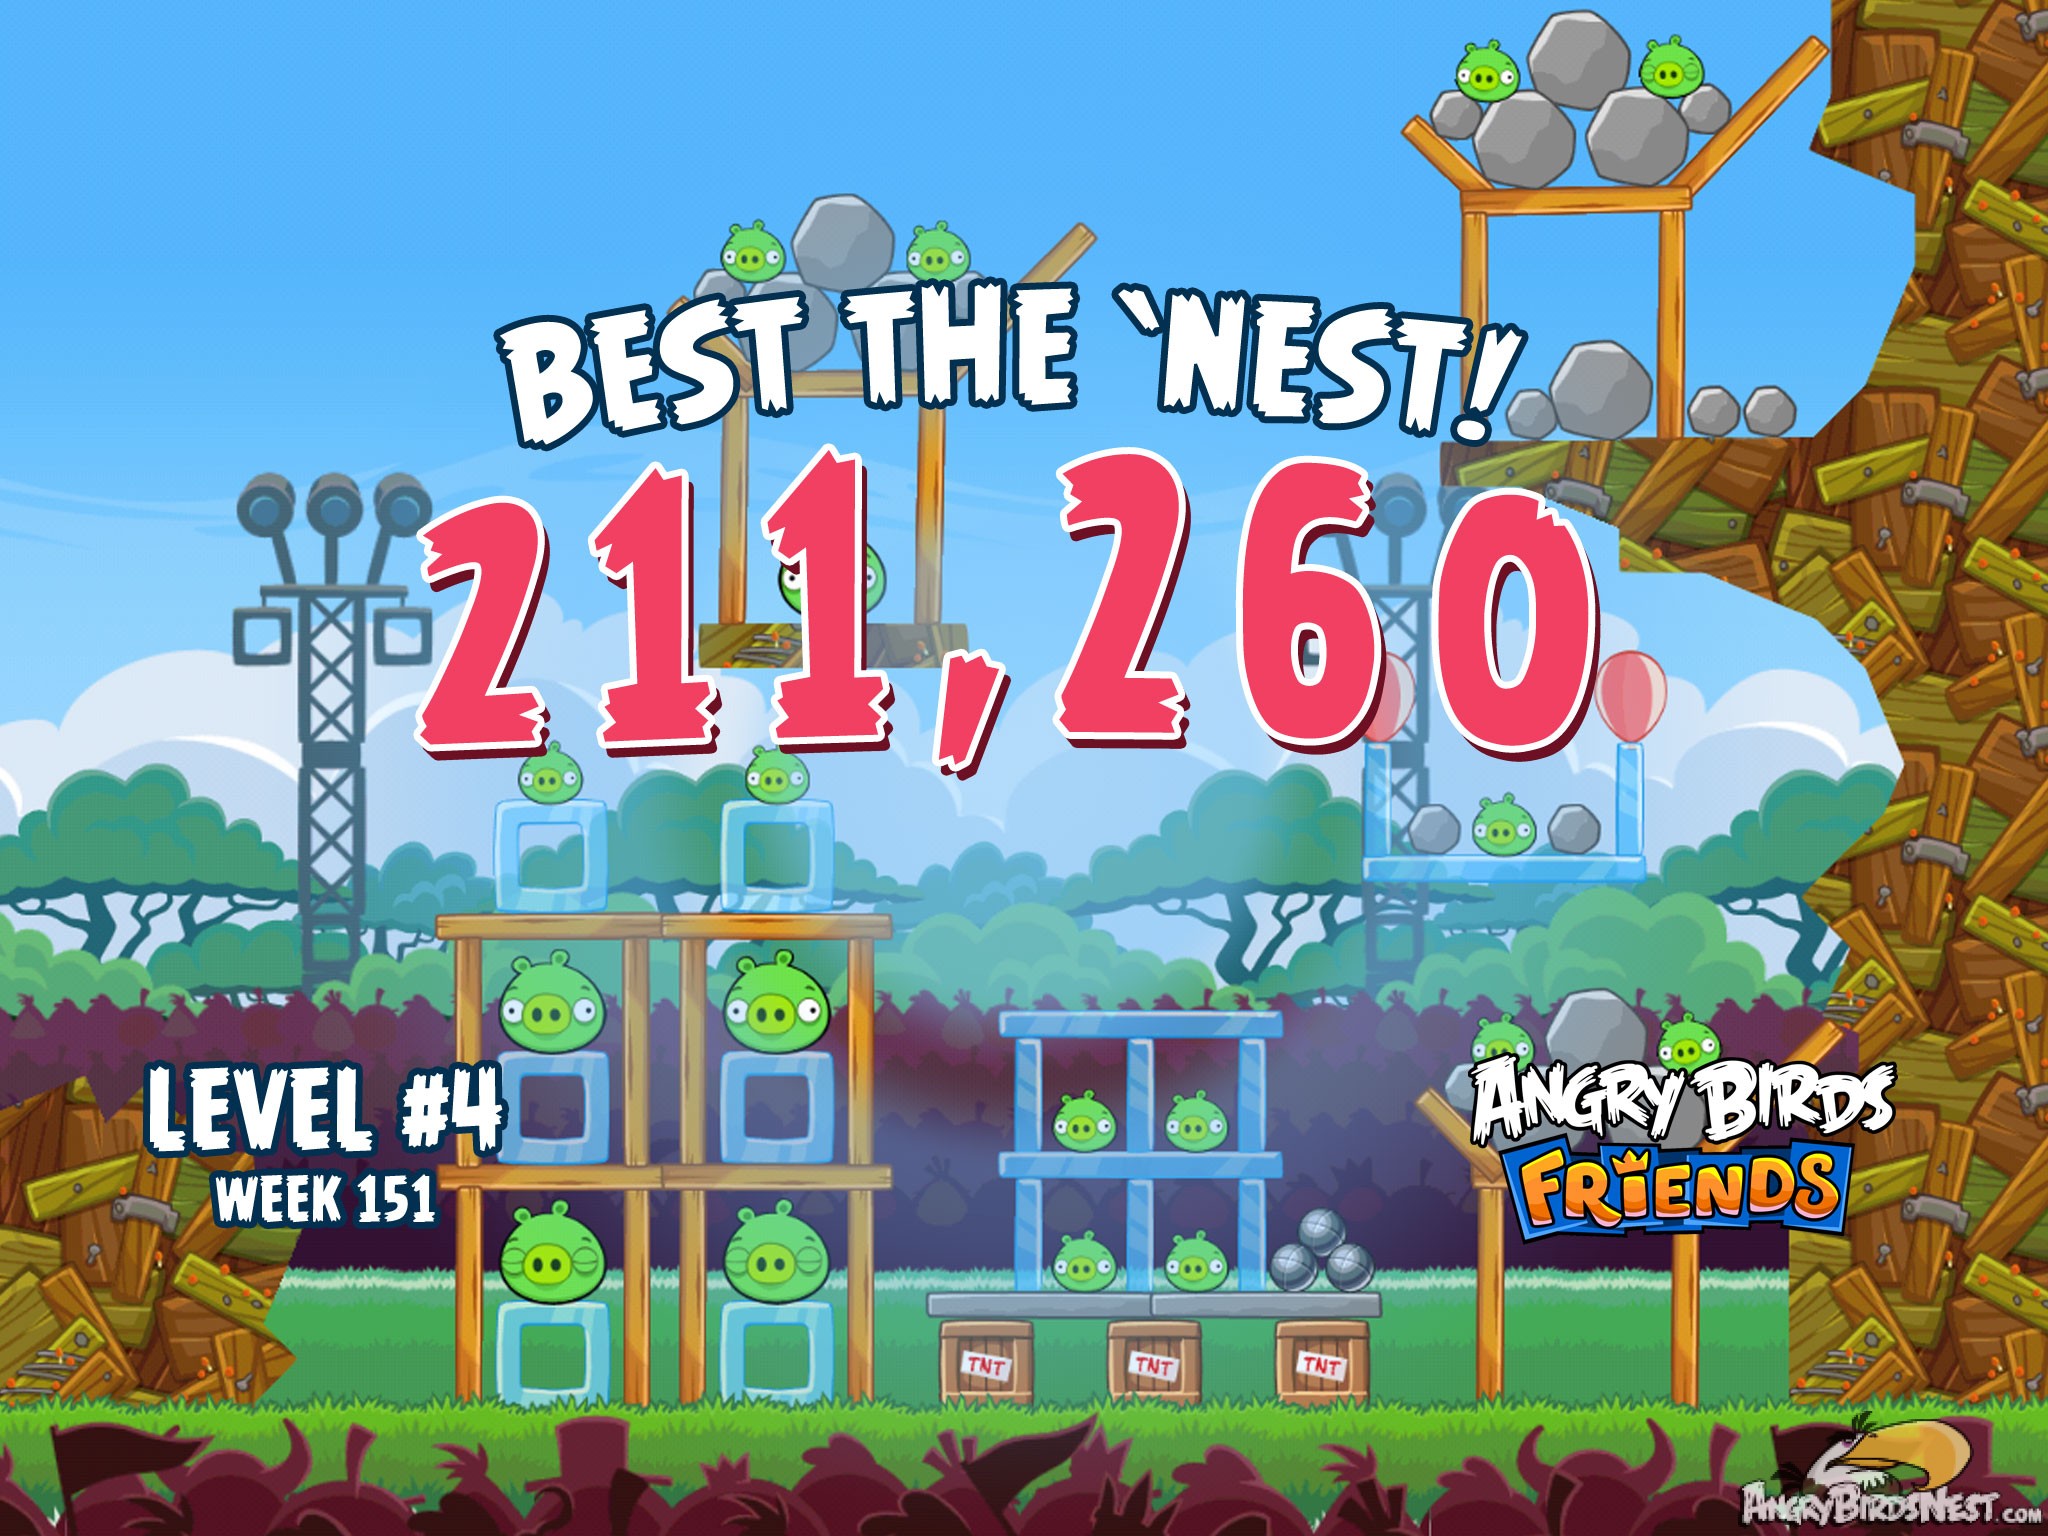 Angry Birds Friends Best the Nest Week 151 Level 4